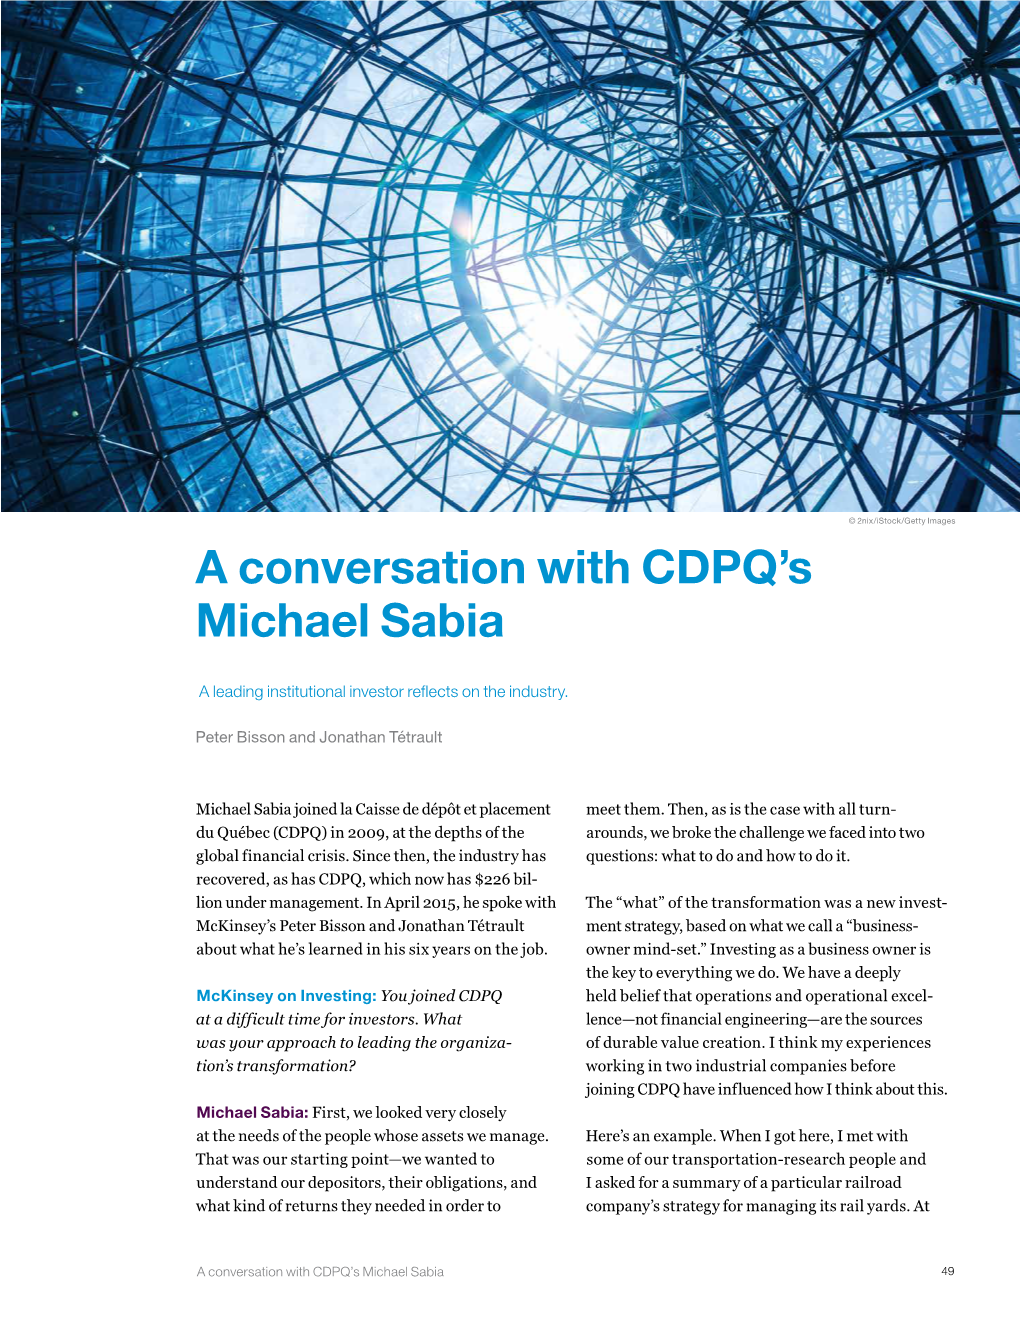 A Conversation with CDPQ's Michael Sabia